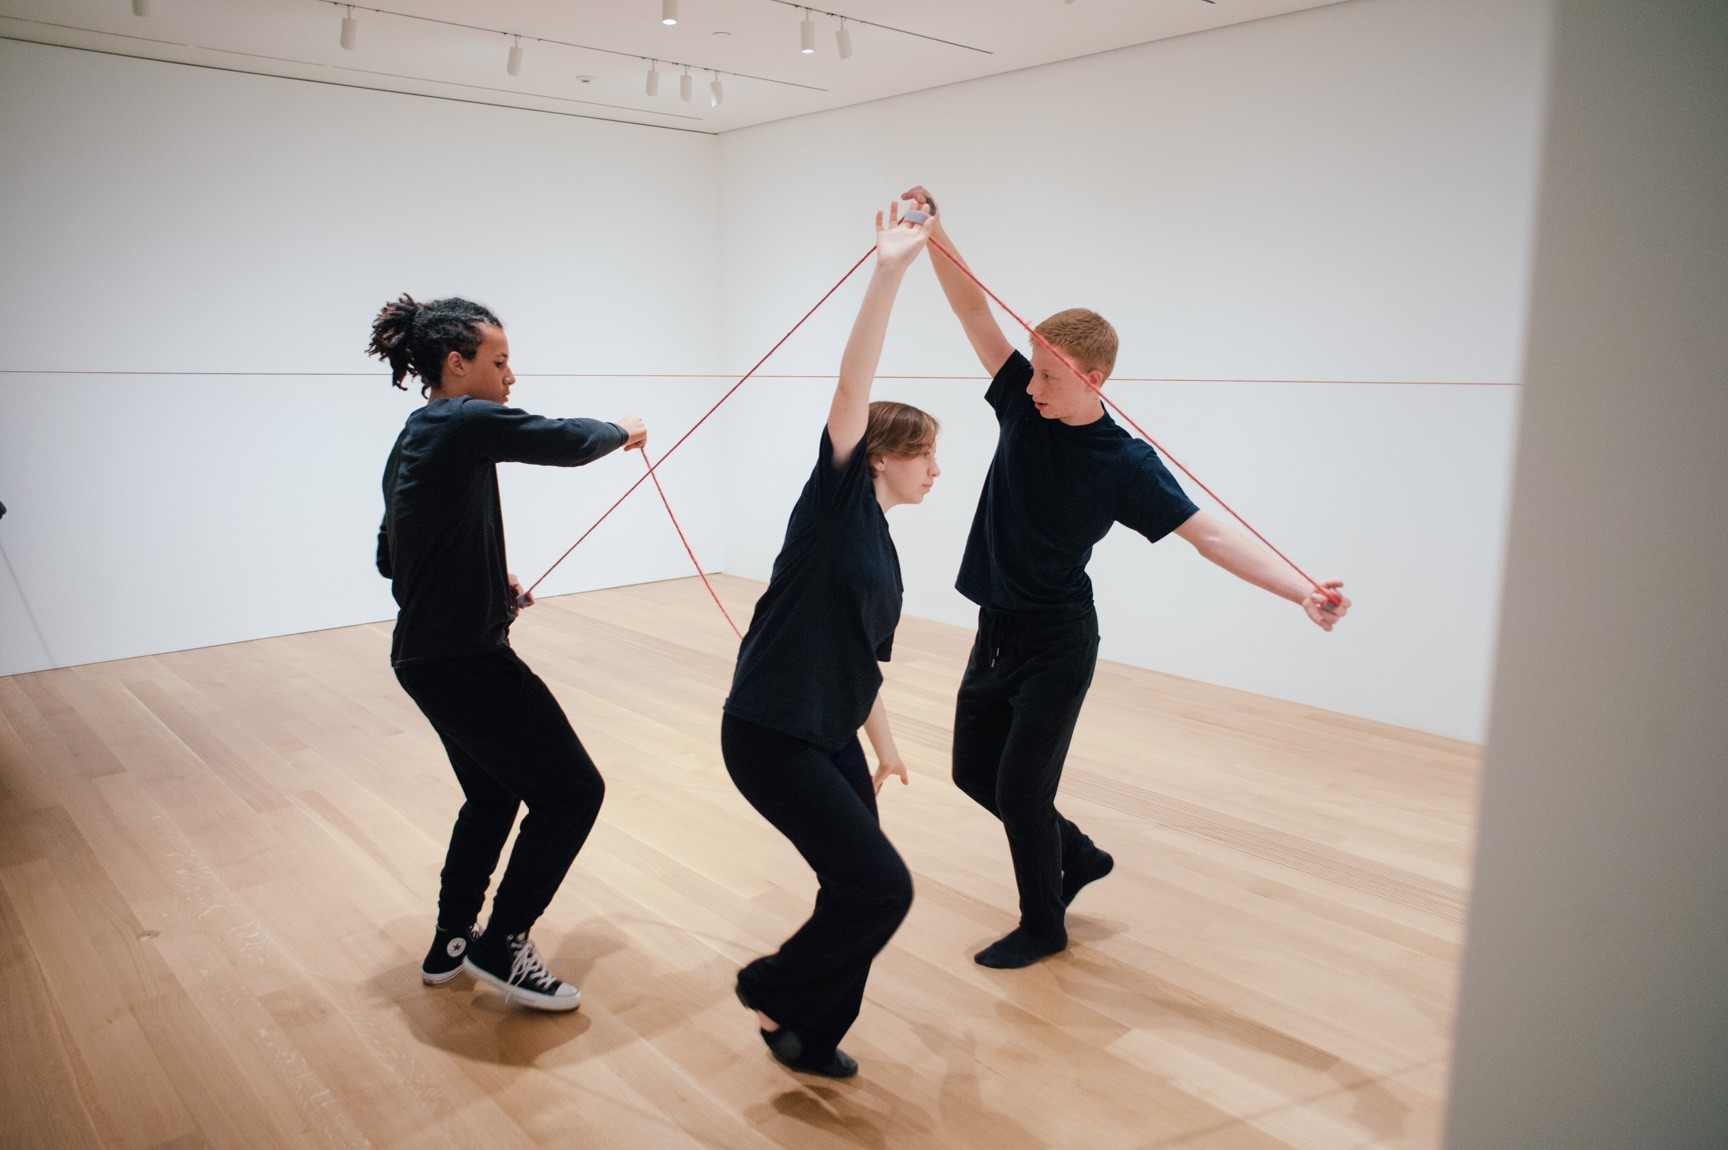 Three students perform the Lower-East Gallery with red ropes tied to their fingers.